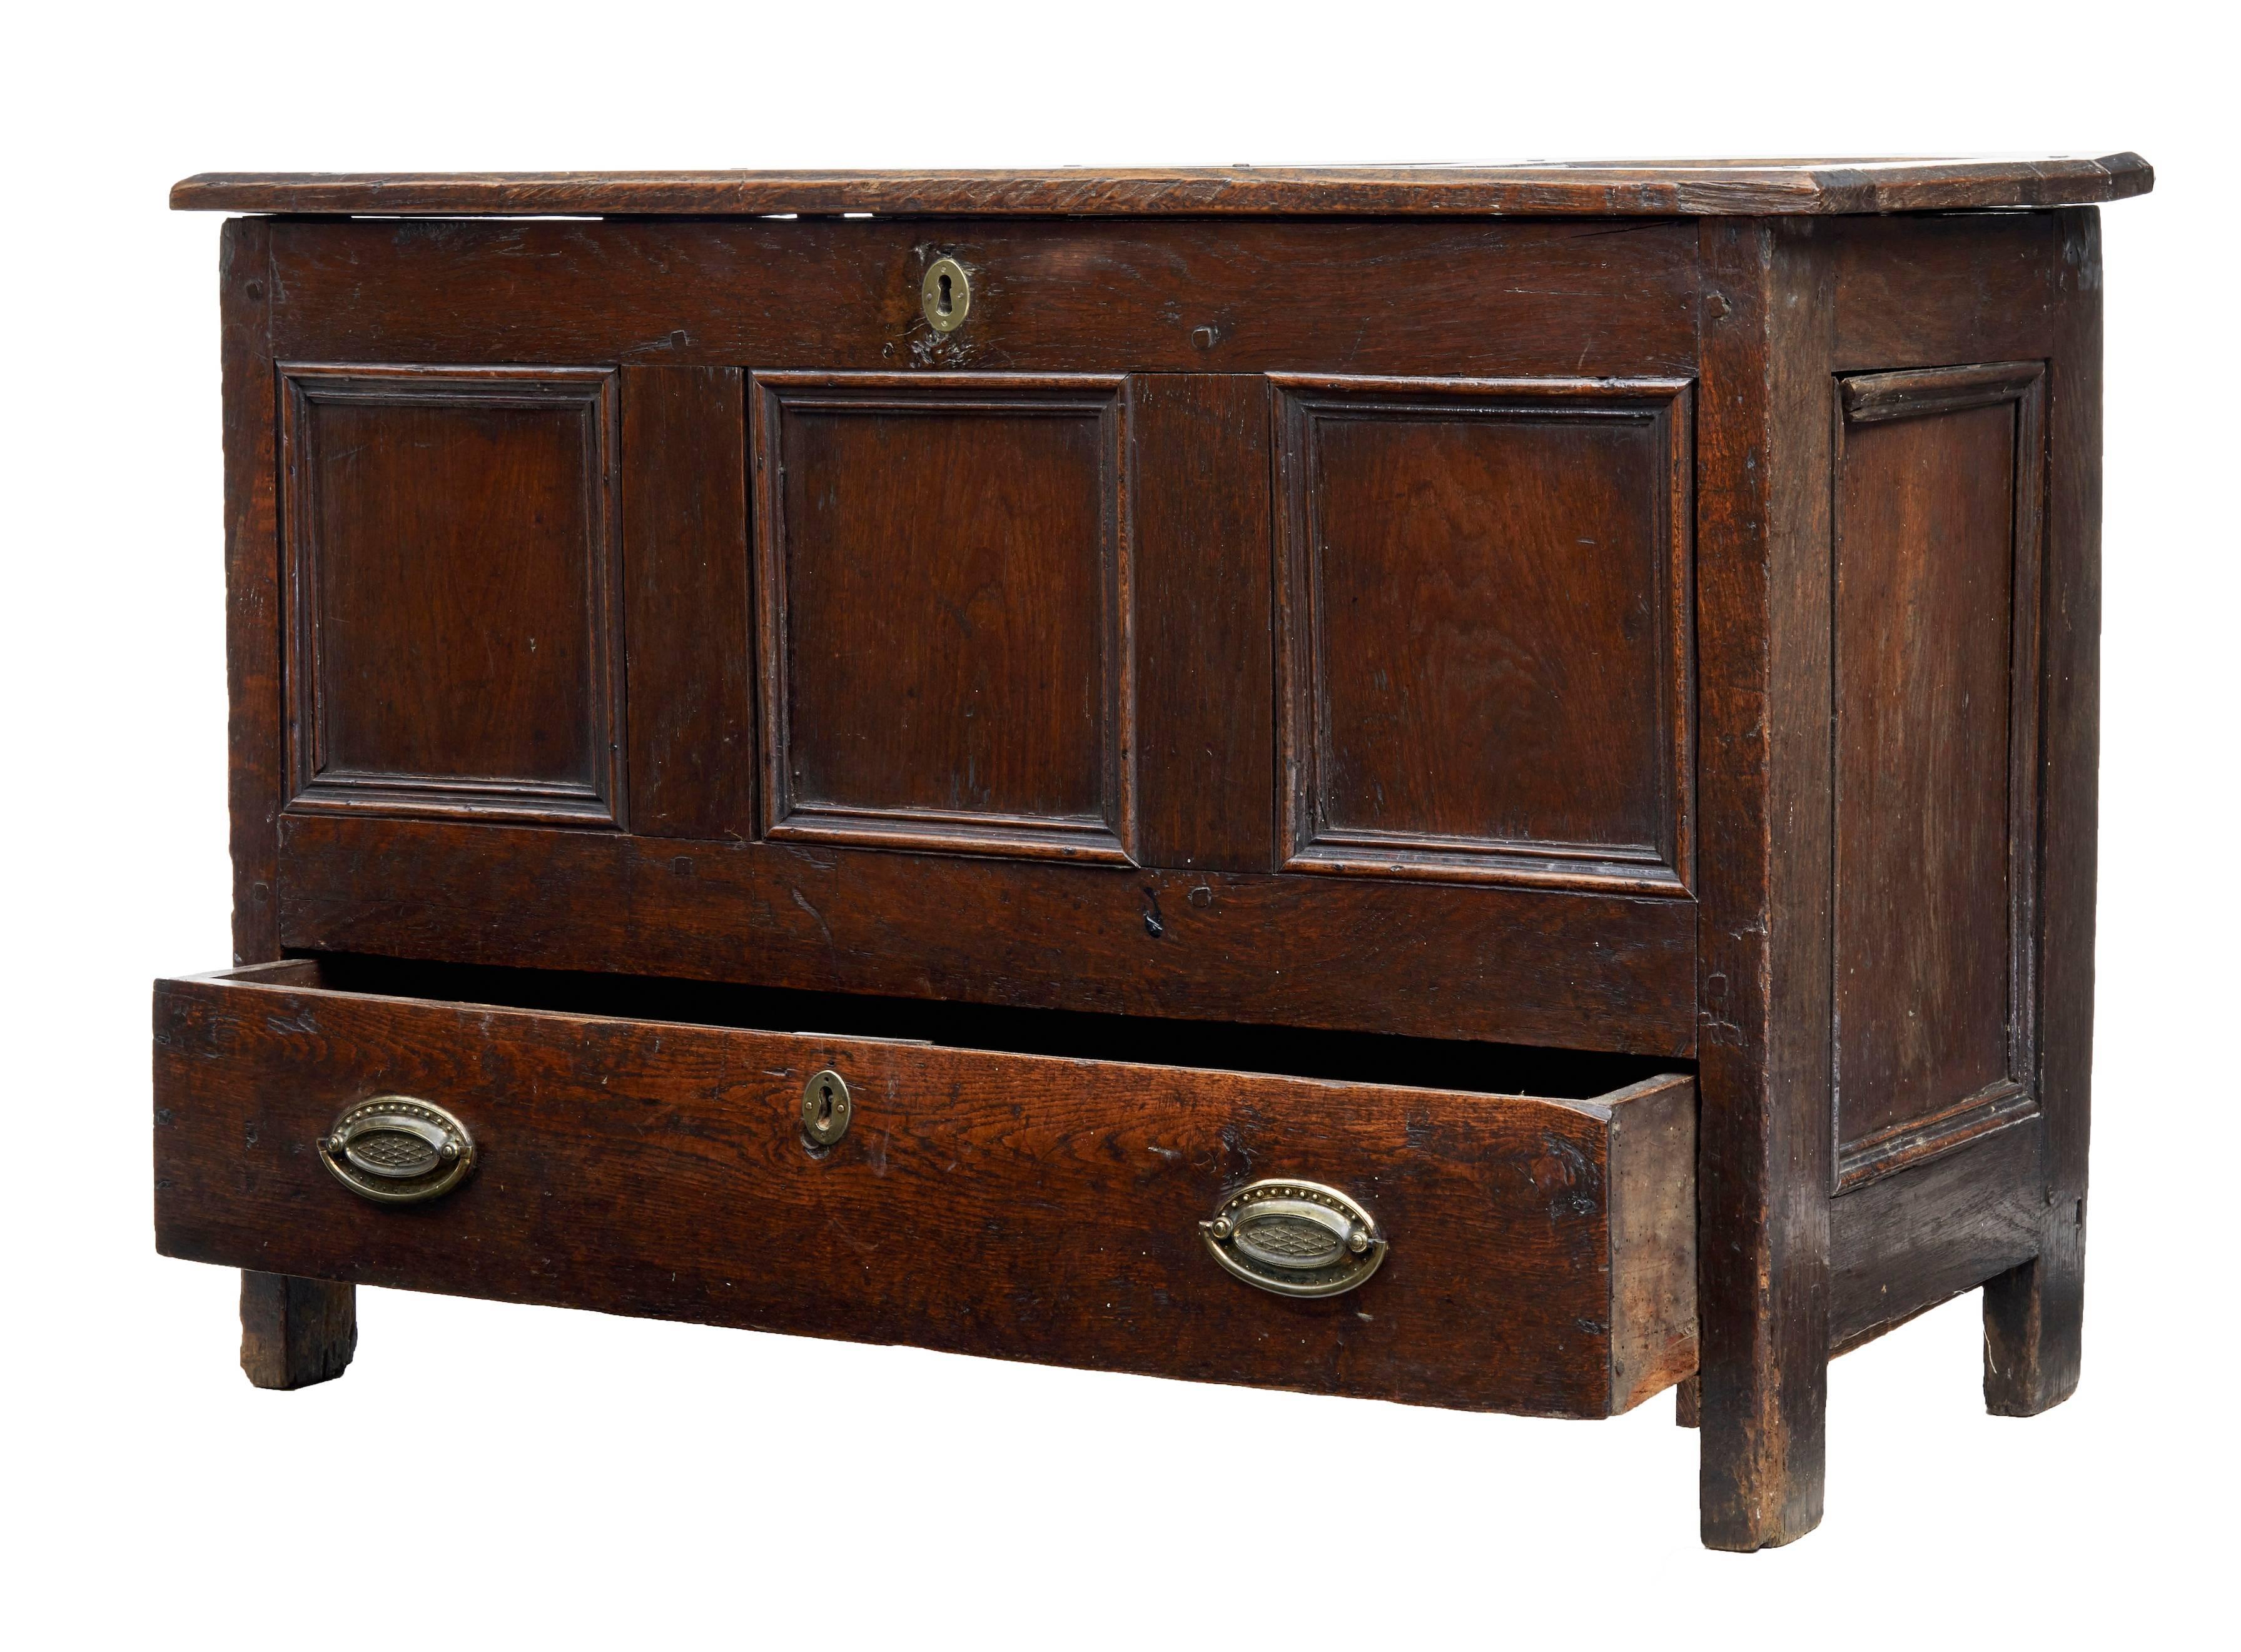 17th century oak mule chest, circa 1690.
Three fielded panels to the front with single drawer below.
Panelled lid with later hinges.
Great character and patina.
Surface marks and wear in line with age.

Measures: Height: 26